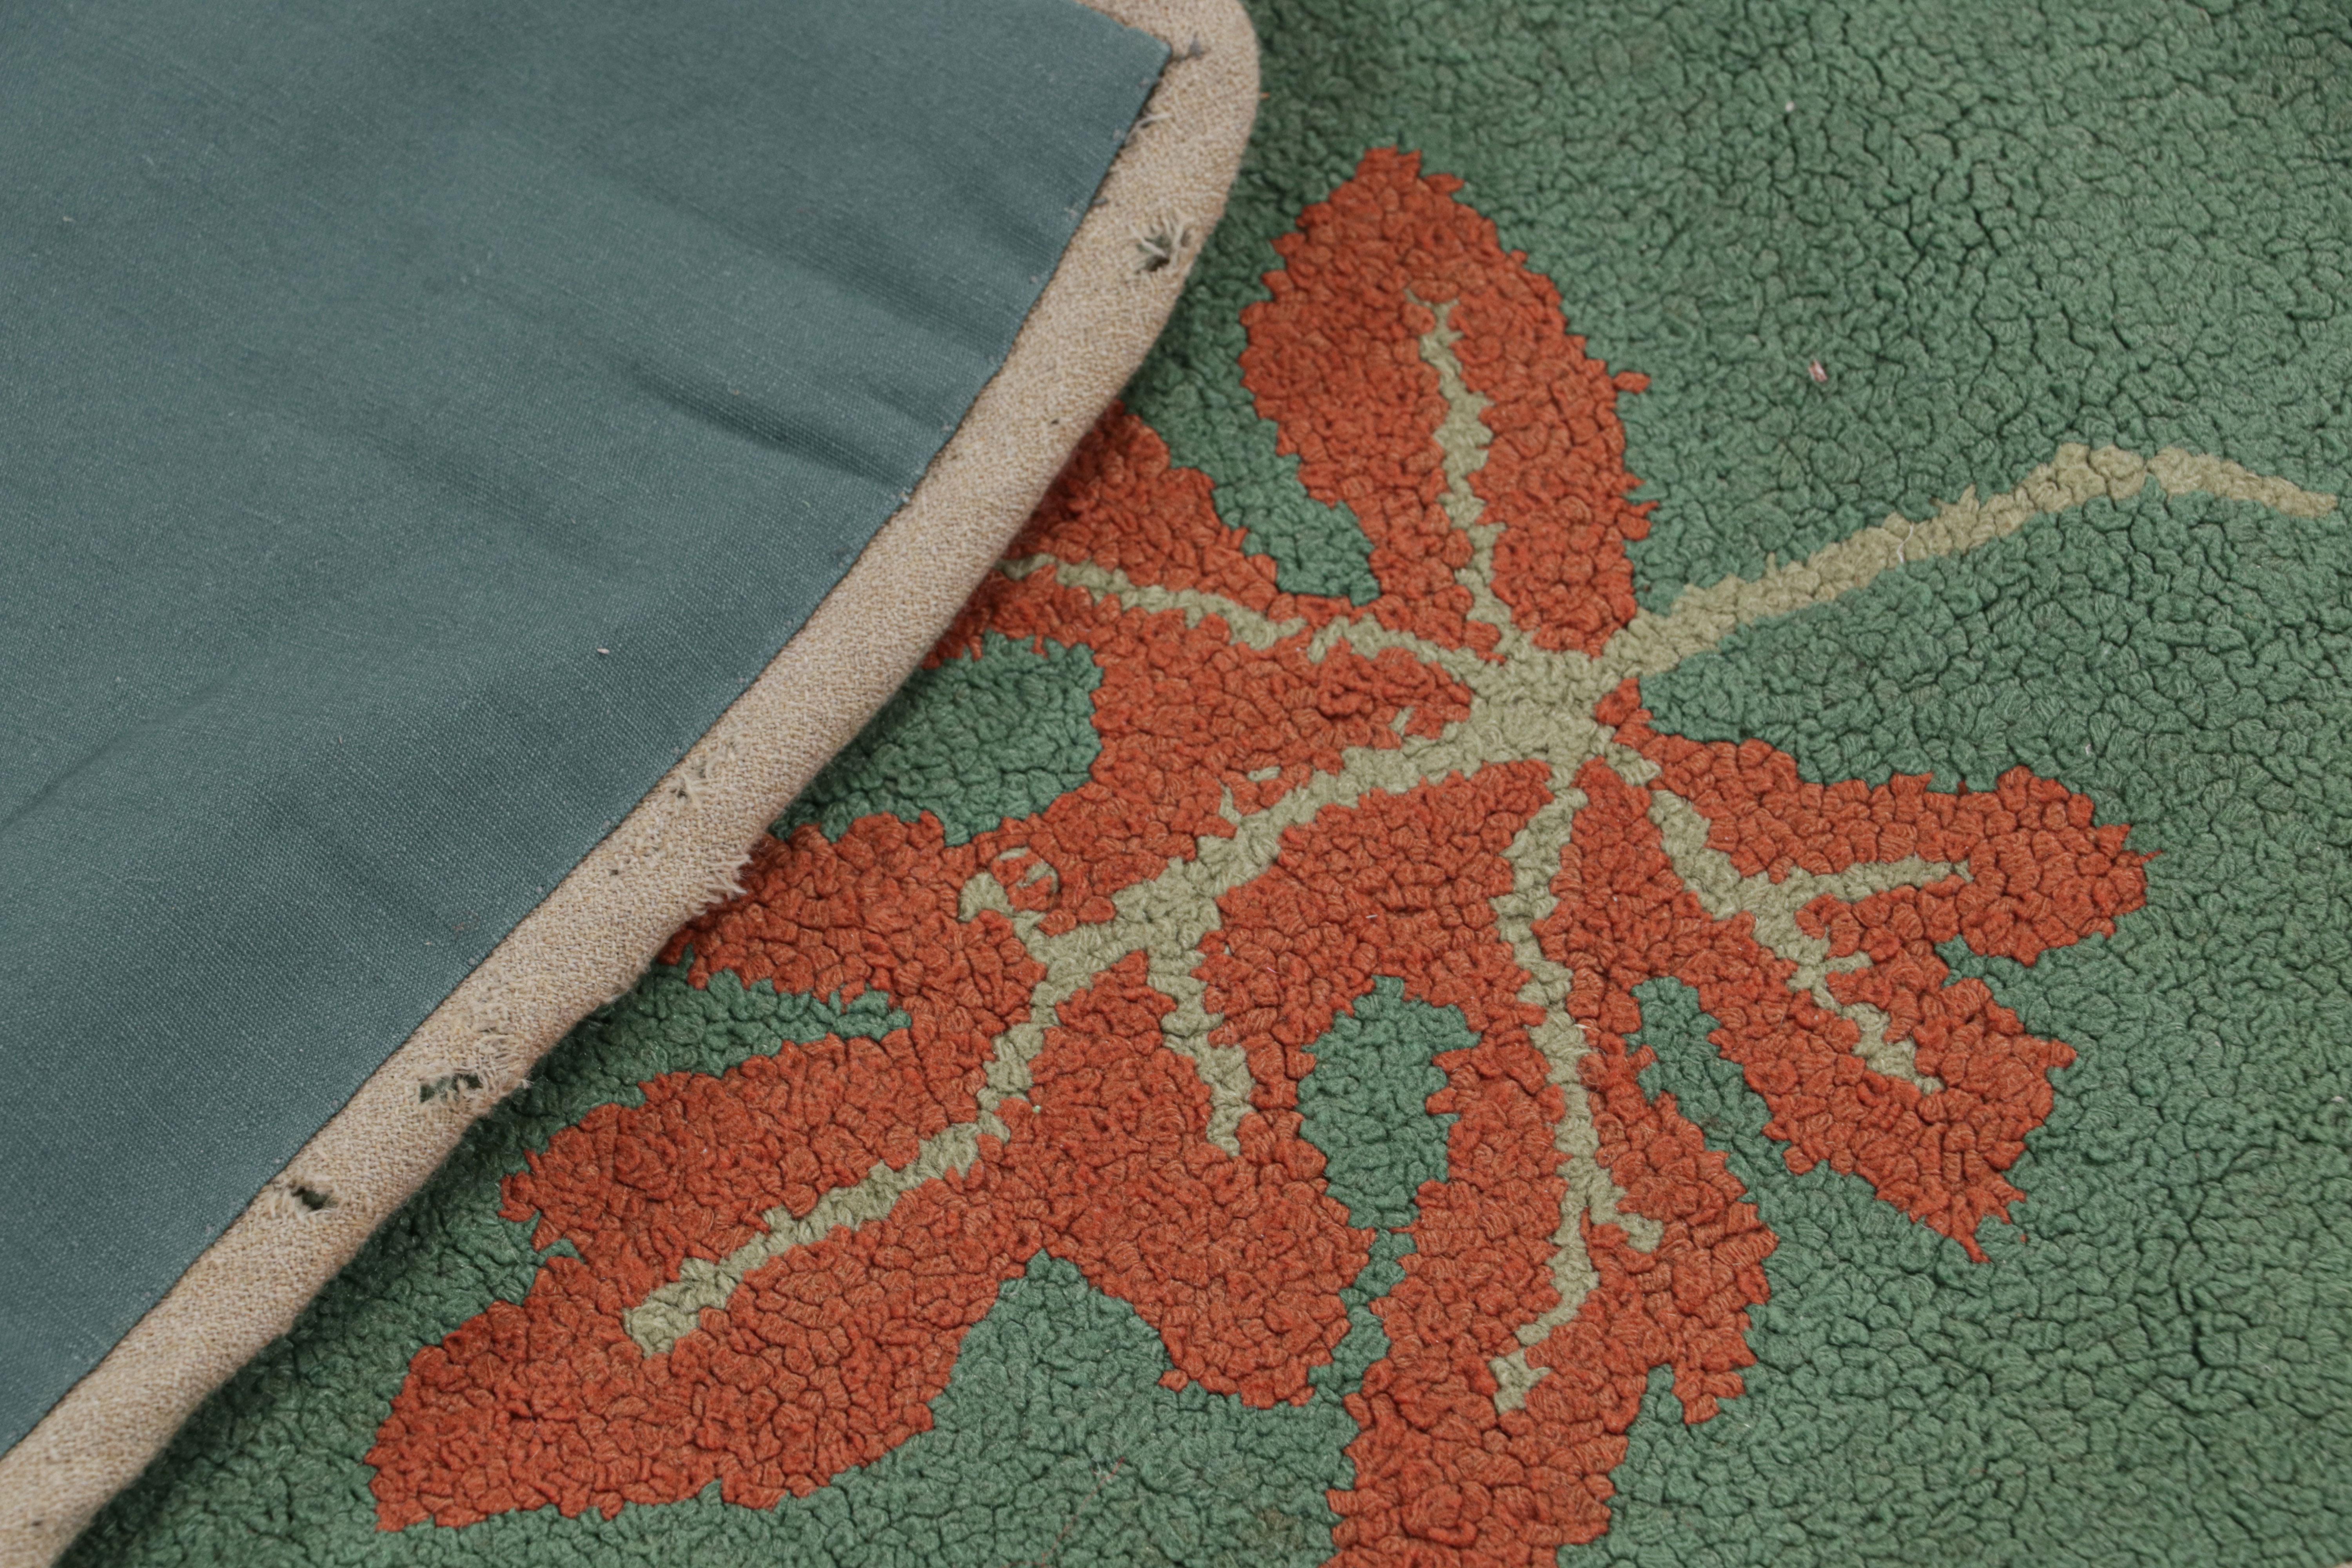 Fabric Antique Hooked Rug in Seafoam with Leaf Floral Patterns, from Rug & Kilim For Sale